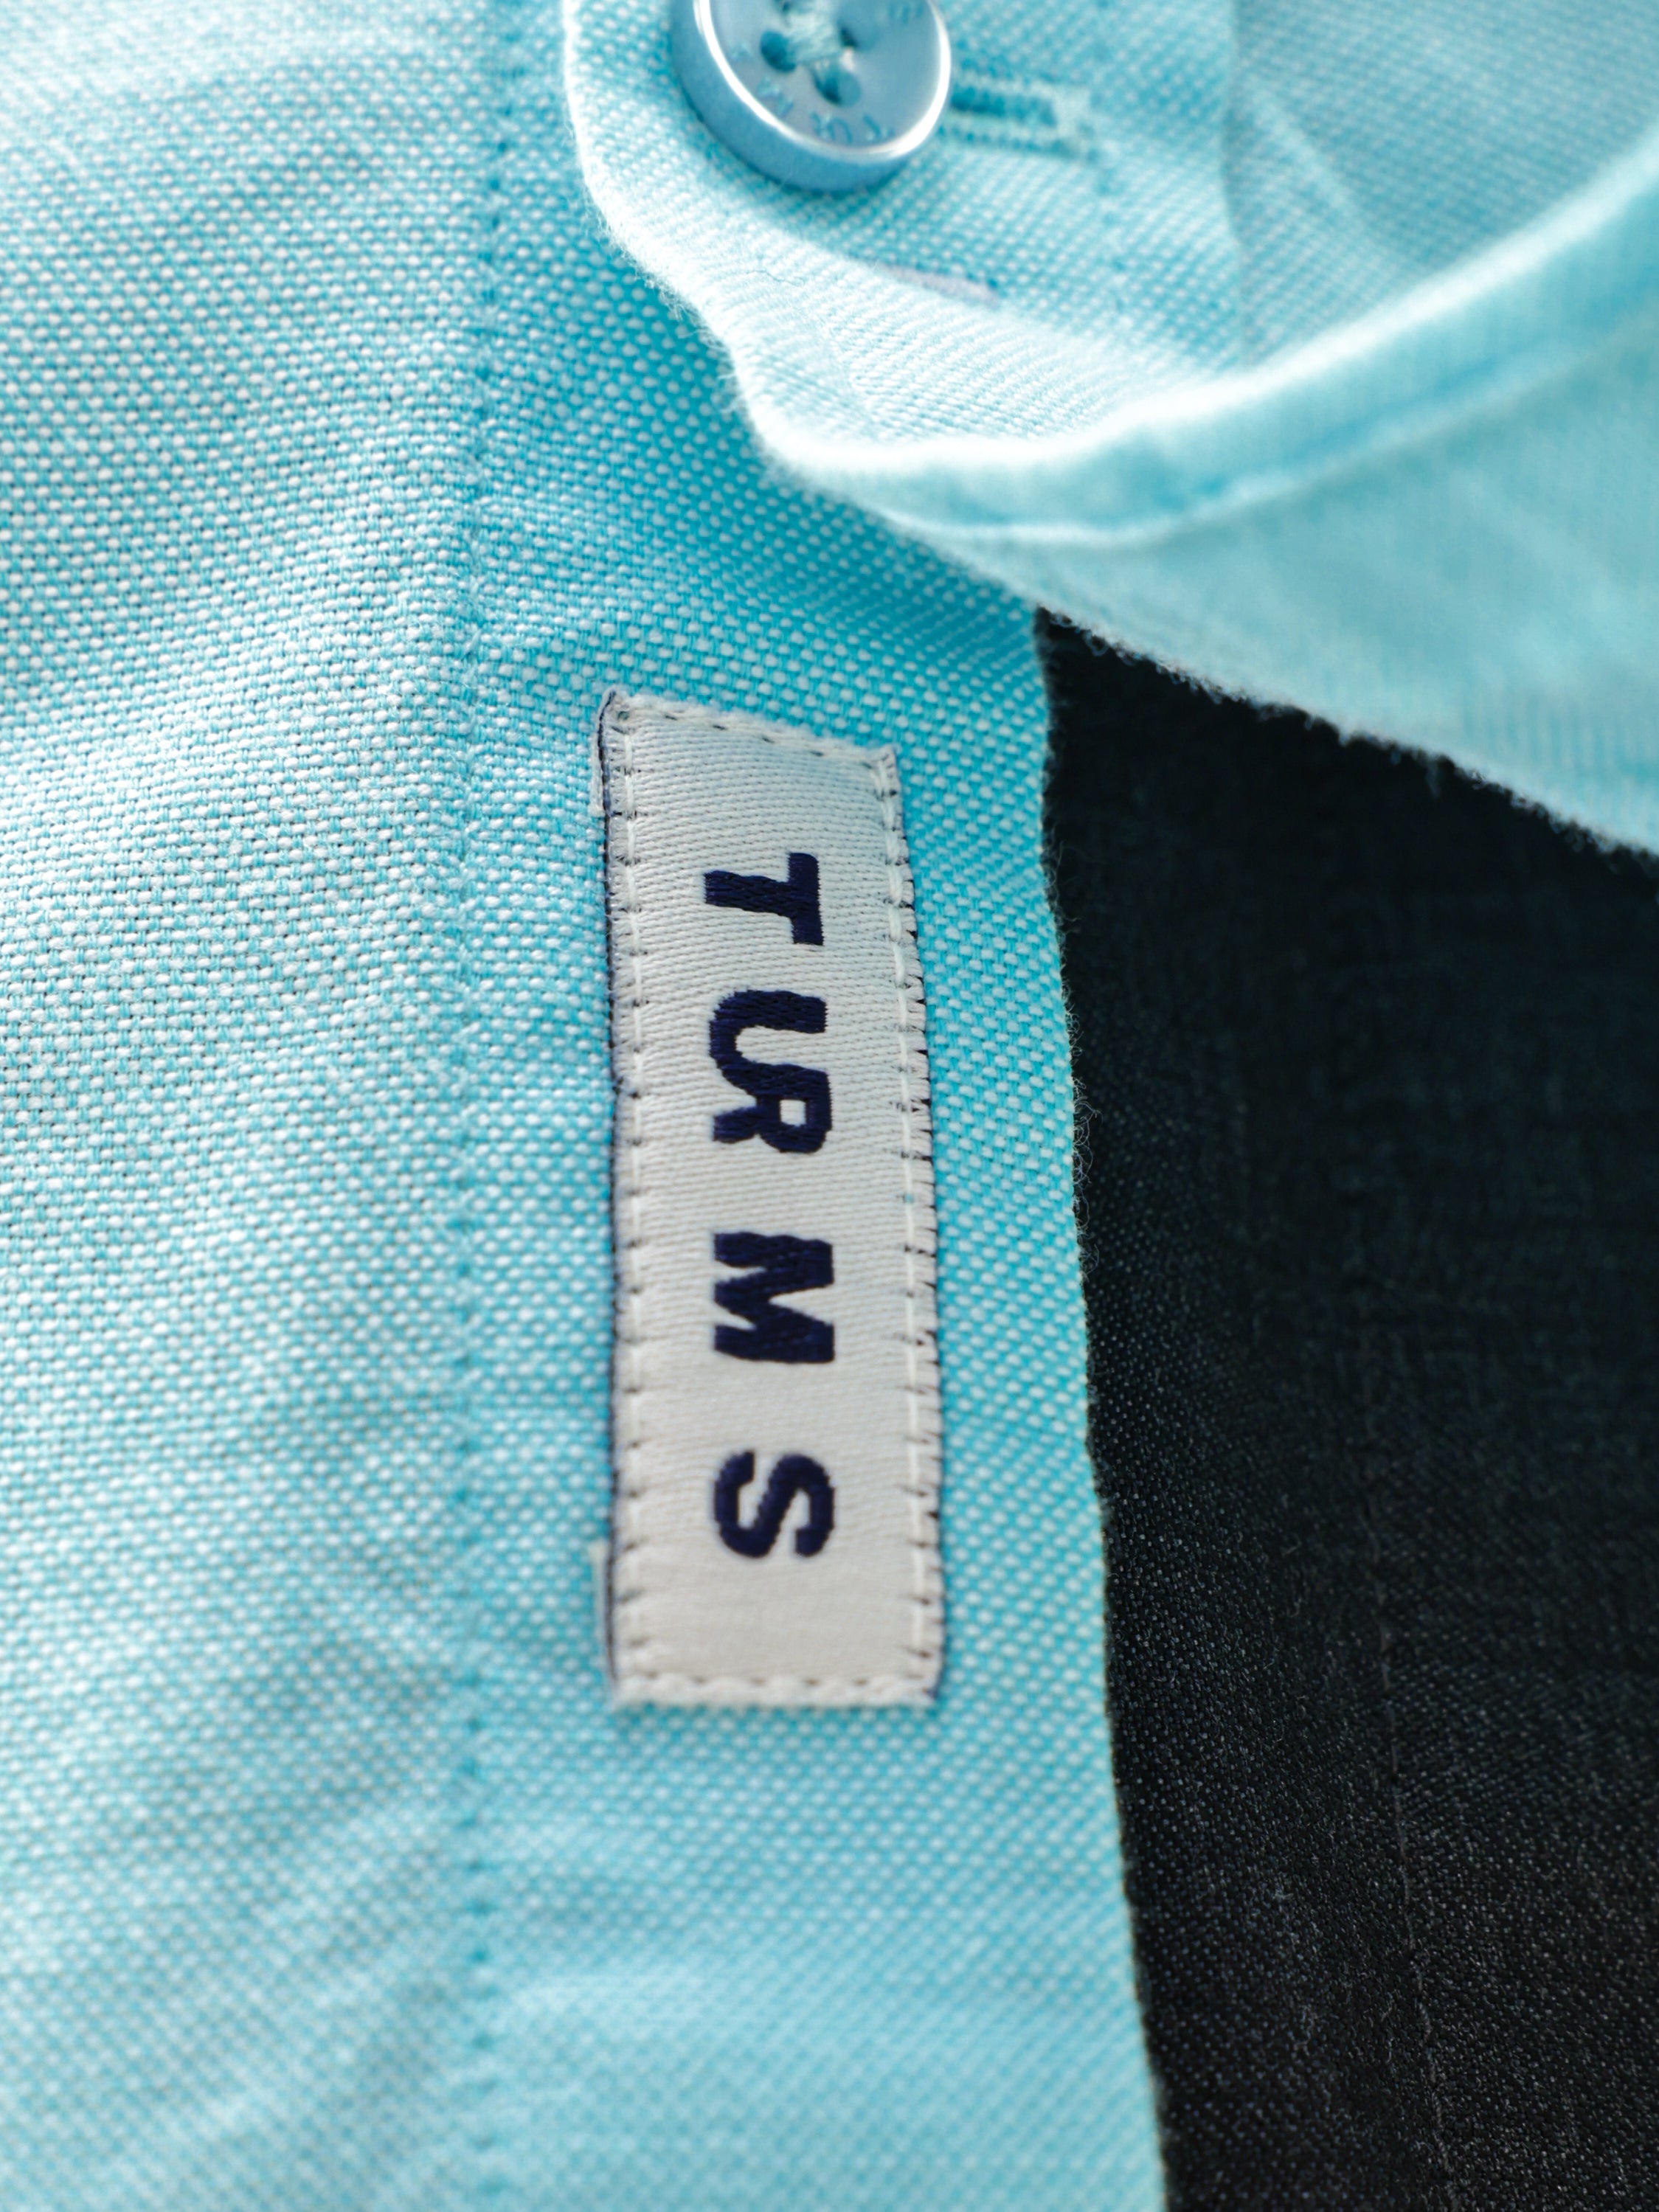 Close-up of Turms tag on a turquoise Oxford shirt, showcasing premium stitching and button detail for menswear.